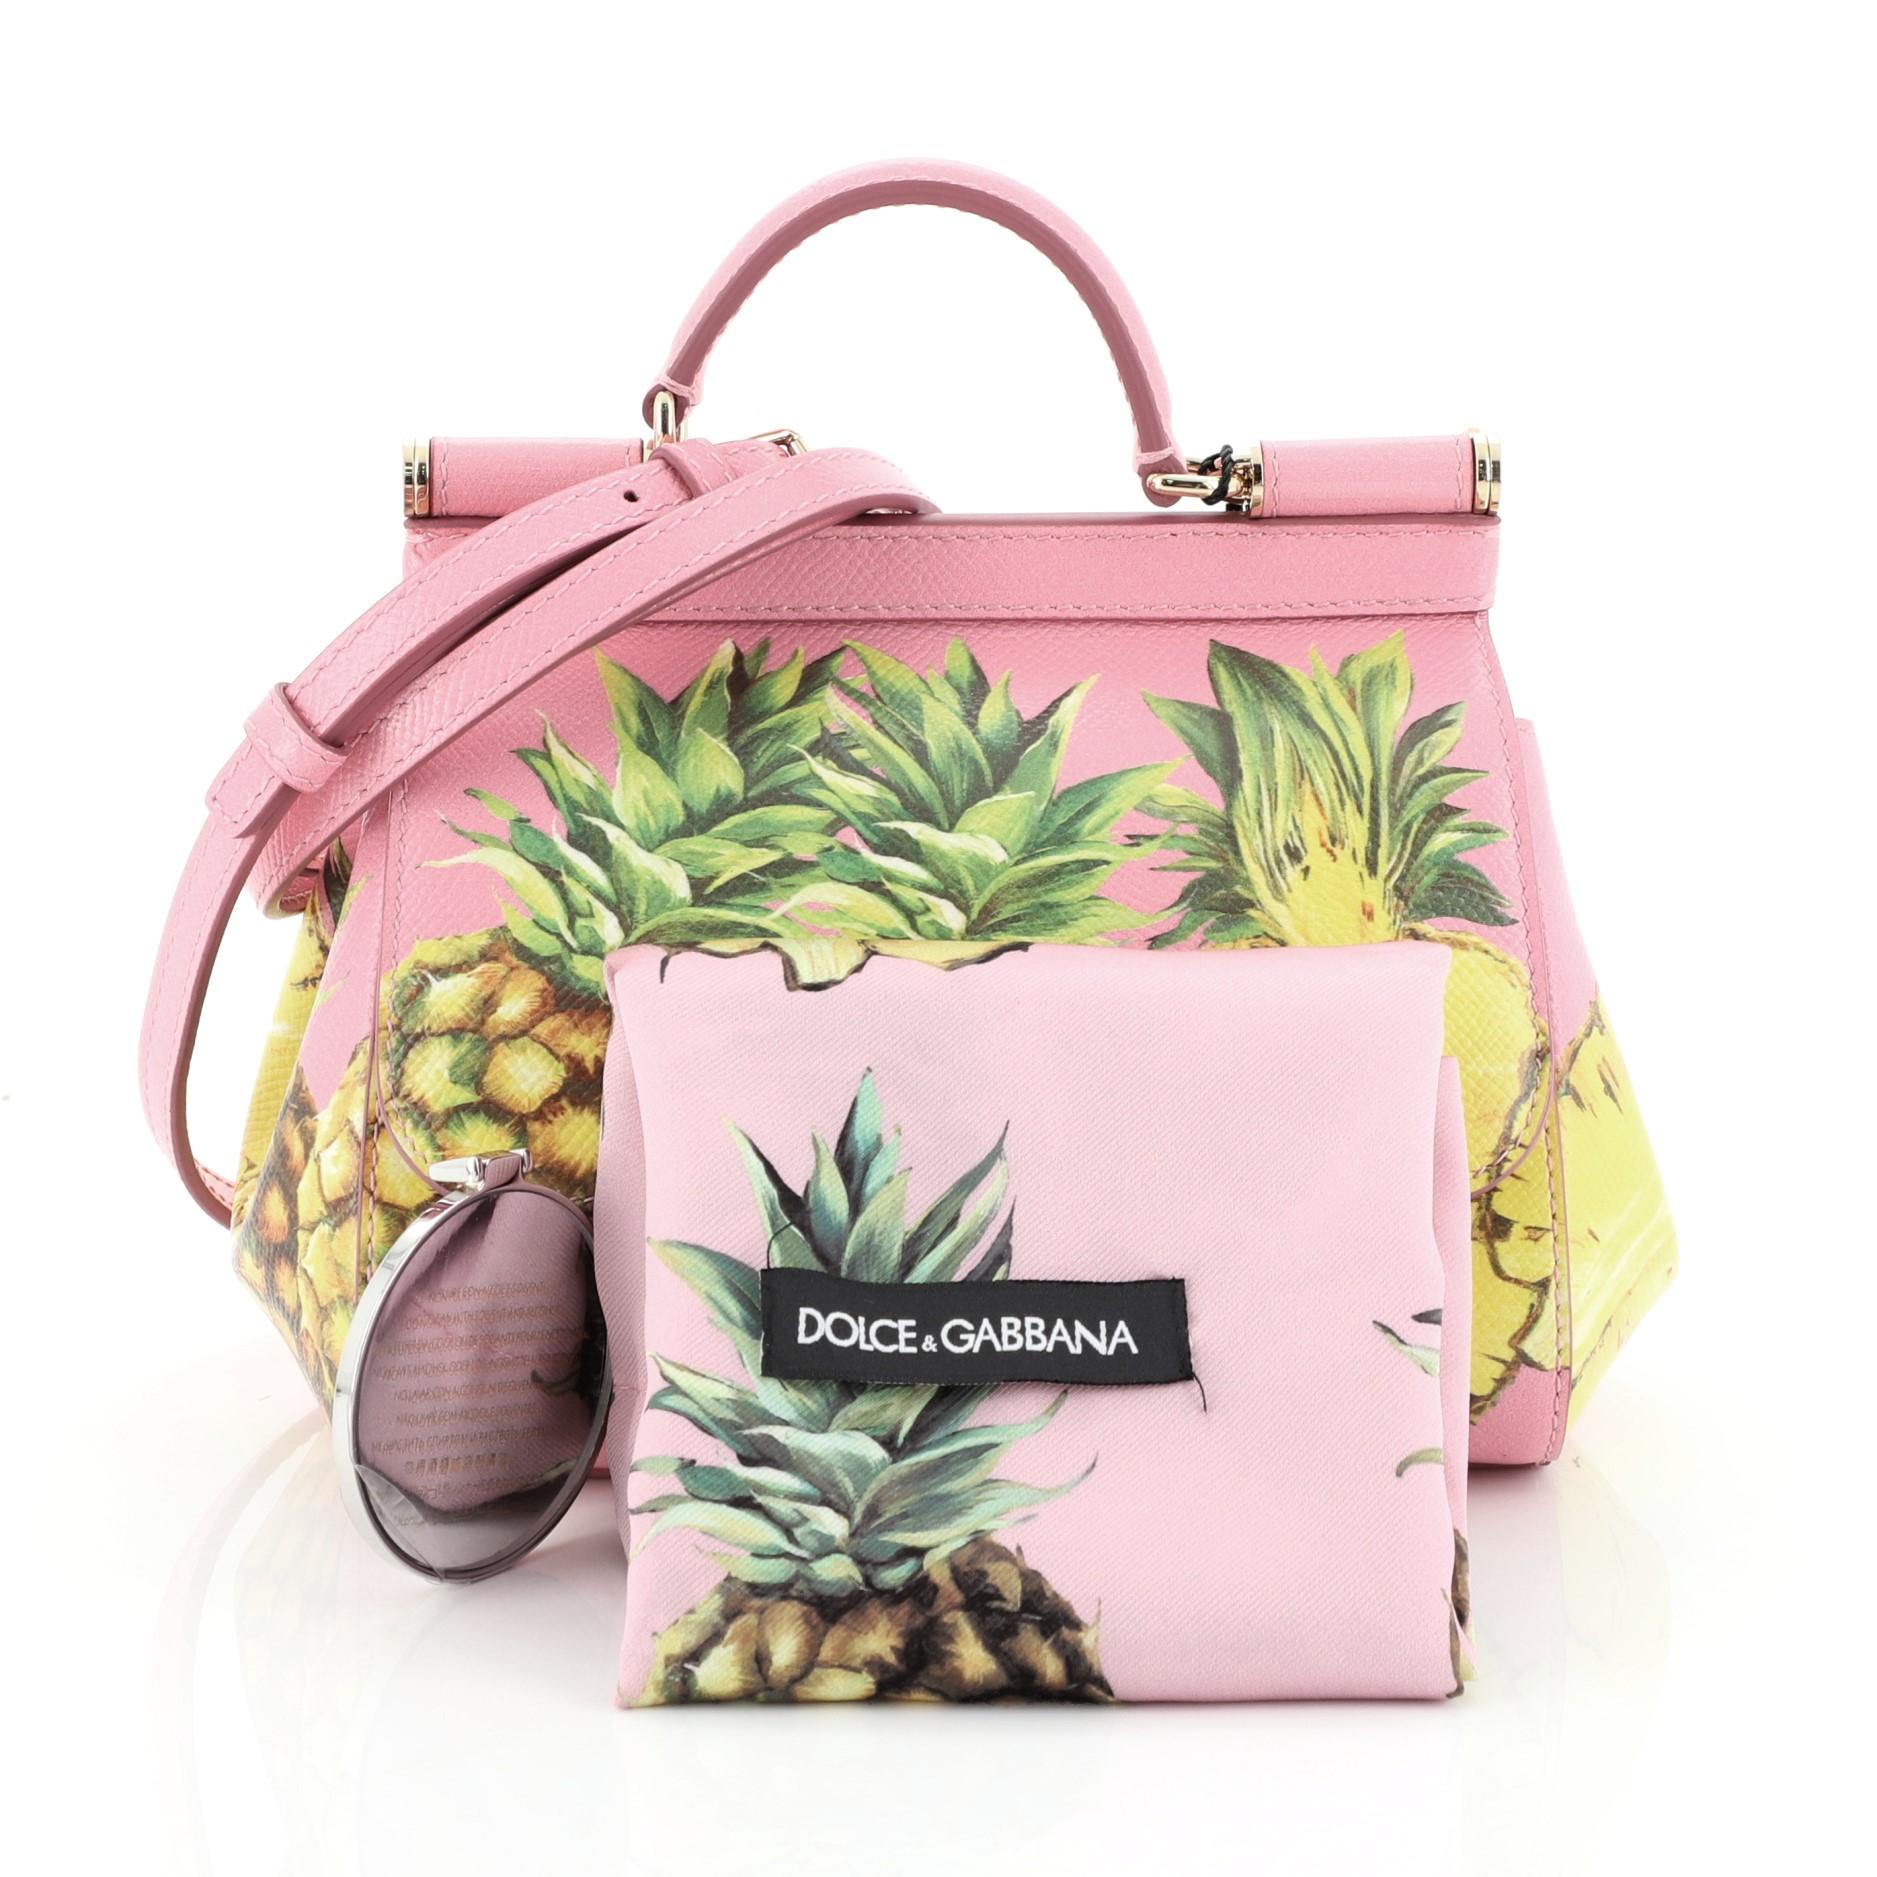 This Dolce & Gabbana Miss Sicily Bag Printed Leather Mini, crafted in pink printed leather, features a single looped leather handle, frontal flap, protective base studs and gold-tone hardware. Its hidden magnetic snap closure opens to a pink leather